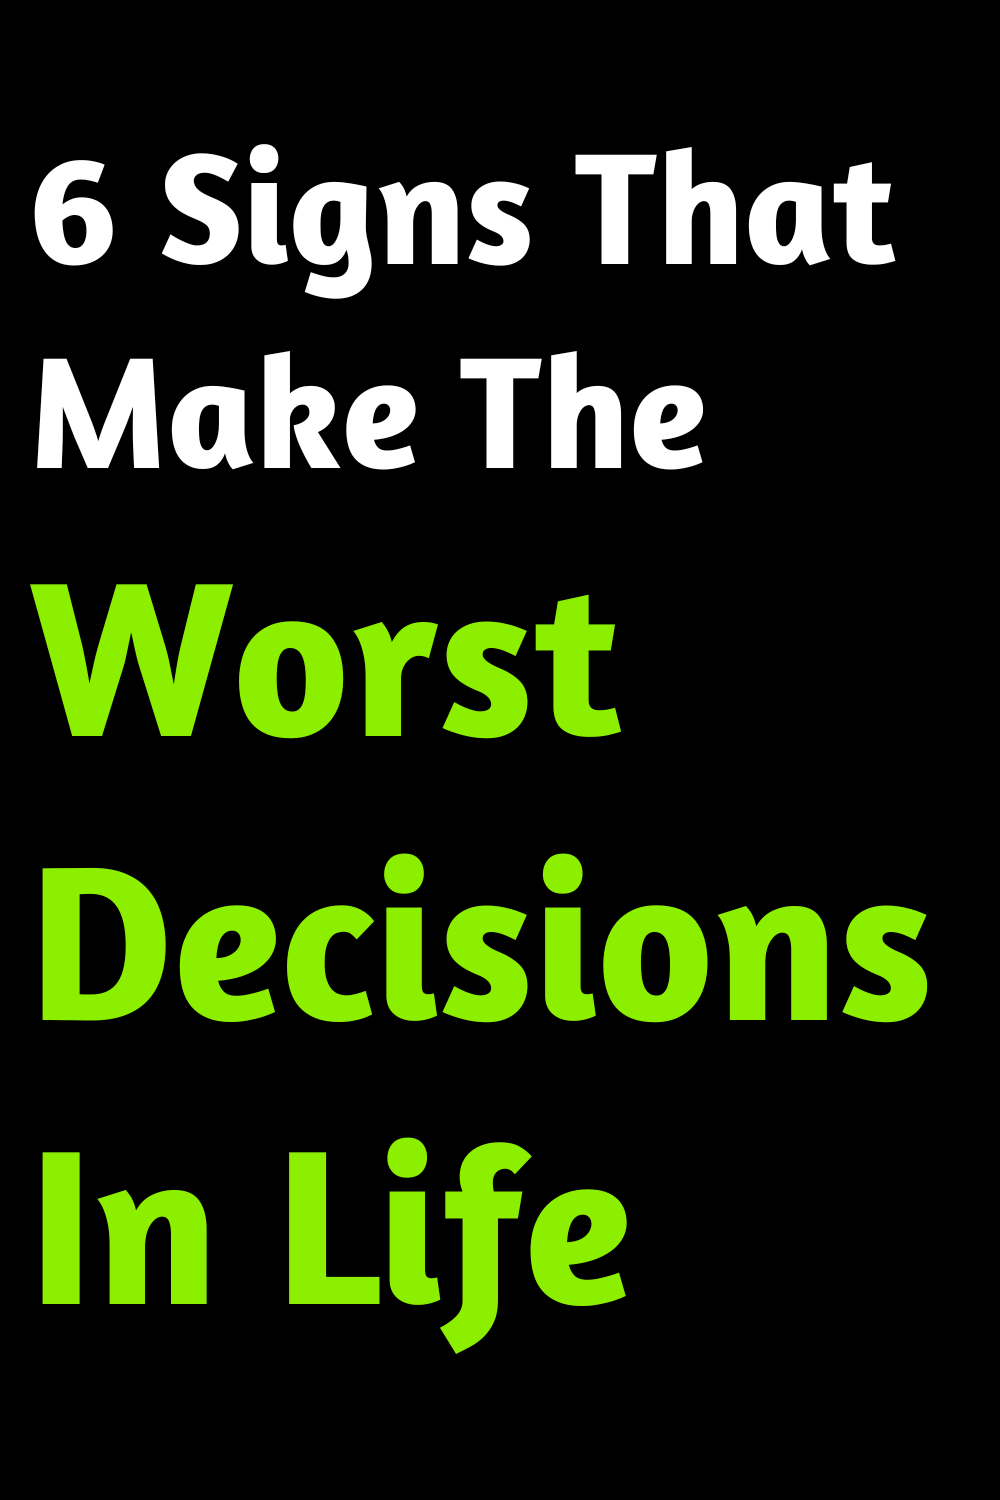 6 Signs That Make The Worst Decisions In Life